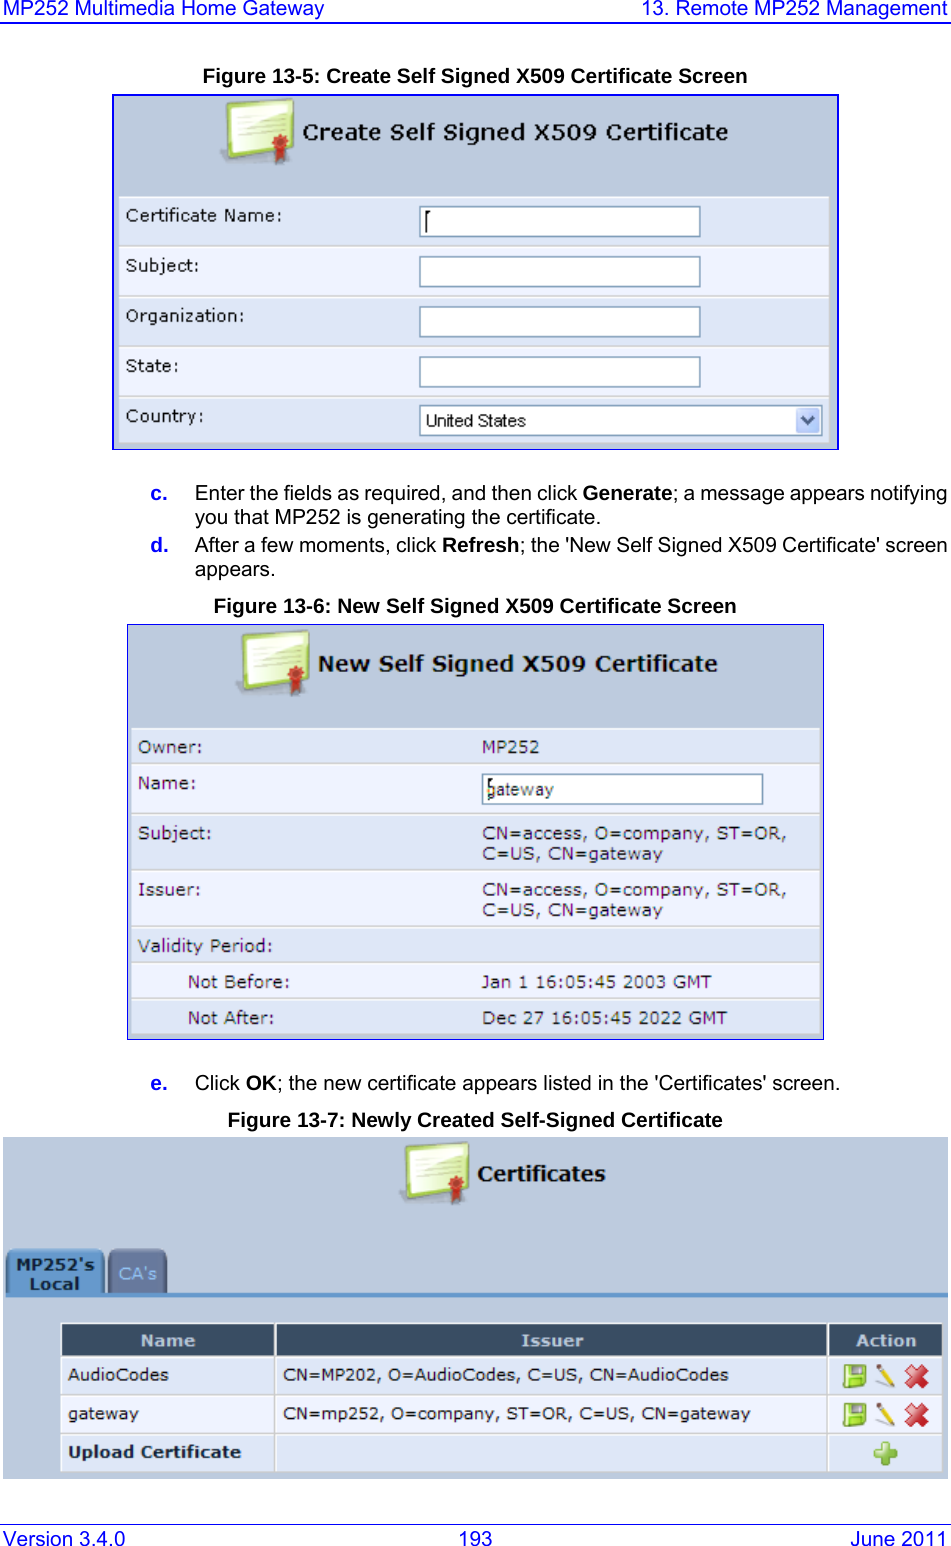 MP252 Multimedia Home Gateway  13. Remote MP252 Management Version 3.4.0  193  June 2011 Figure 13-5: Create Self Signed X509 Certificate Screen  c.  Enter the fields as required, and then click Generate; a message appears notifying you that MP252 is generating the certificate. d.  After a few moments, click Refresh; the &apos;New Self Signed X509 Certificate&apos; screen appears. Figure 13-6: New Self Signed X509 Certificate Screen  e.  Click OK; the new certificate appears listed in the &apos;Certificates&apos; screen. Figure 13-7: Newly Created Self-Signed Certificate  